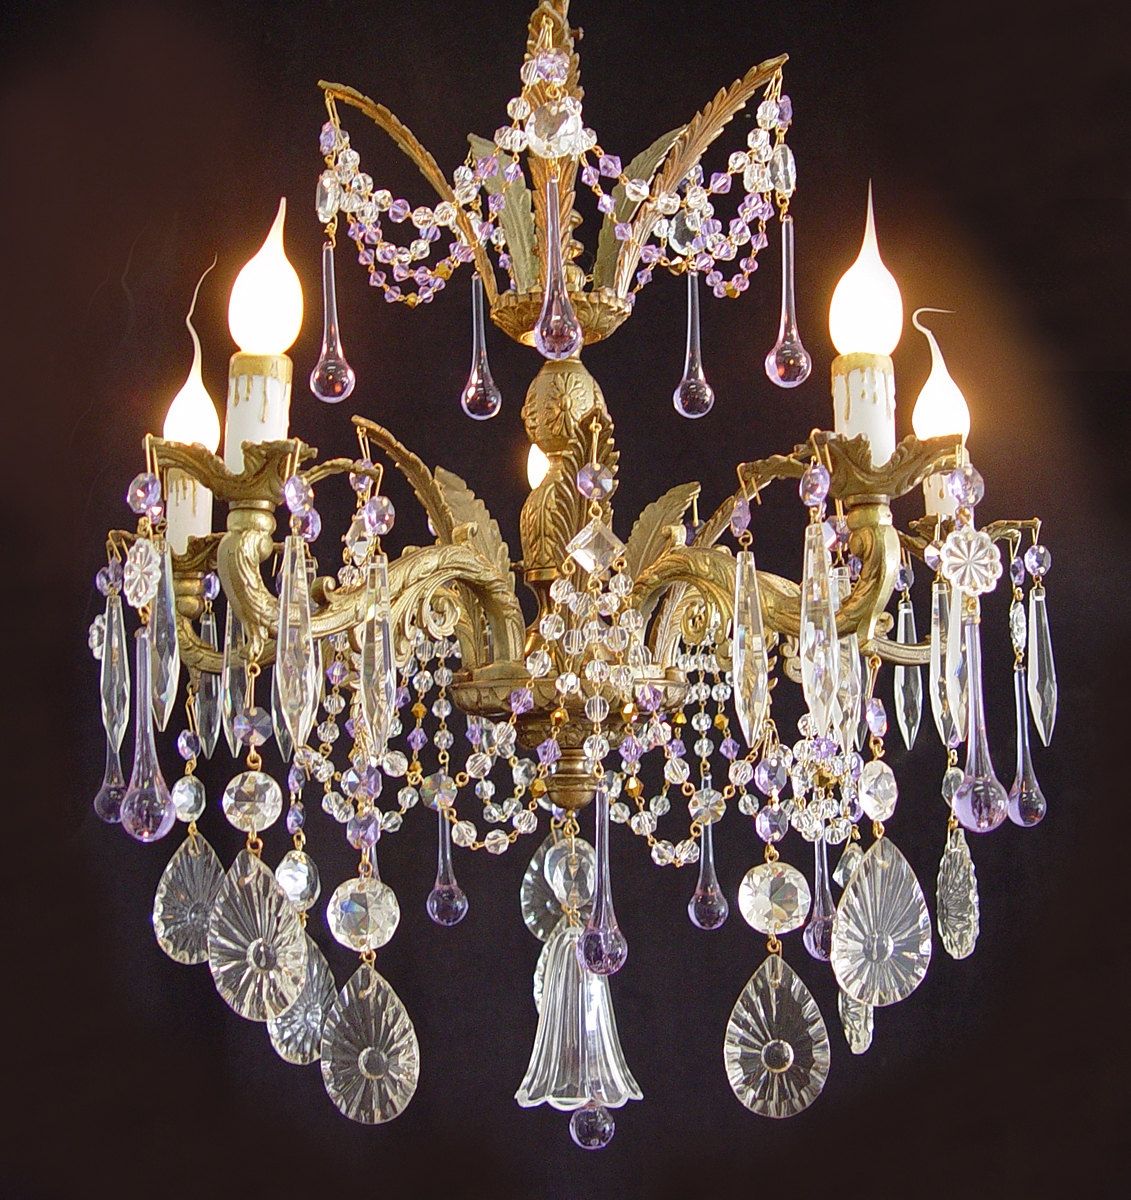 Chandeliers Lighting Decor Glamorous Vintage Brass Crystal In Purple Crystal Chandelier Lights (View 14 of 25)